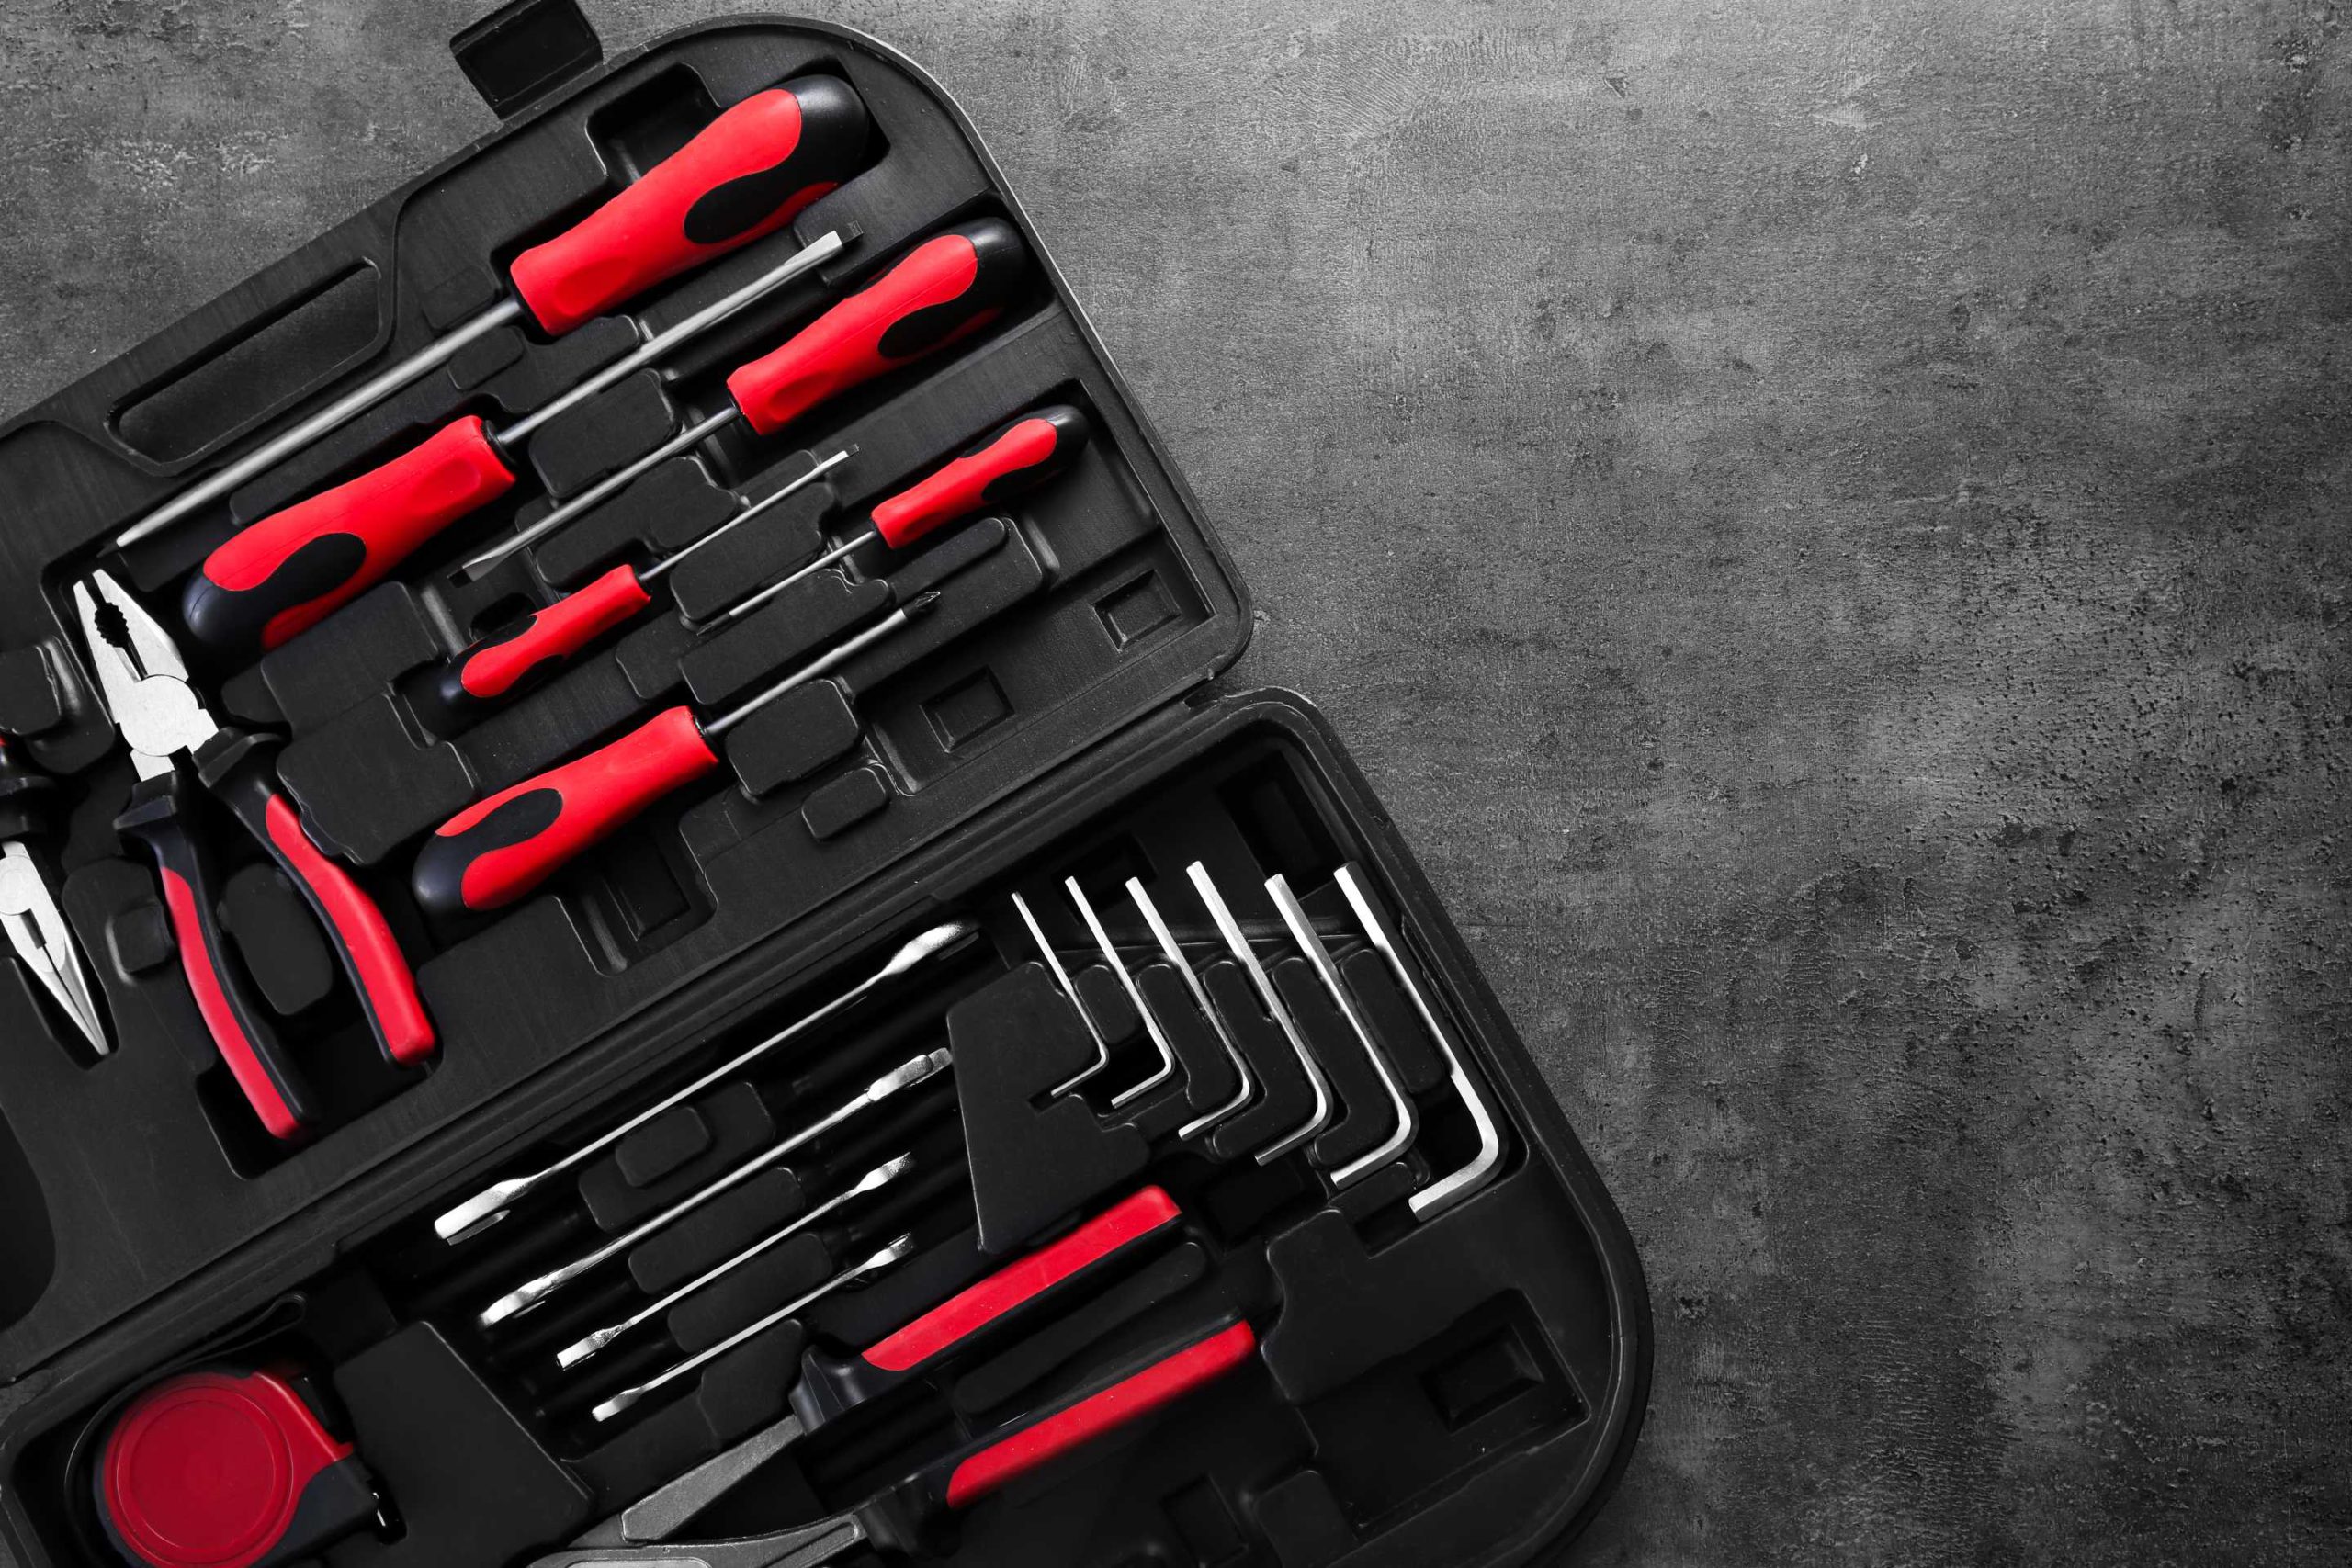 Ways To Organize Your Tools